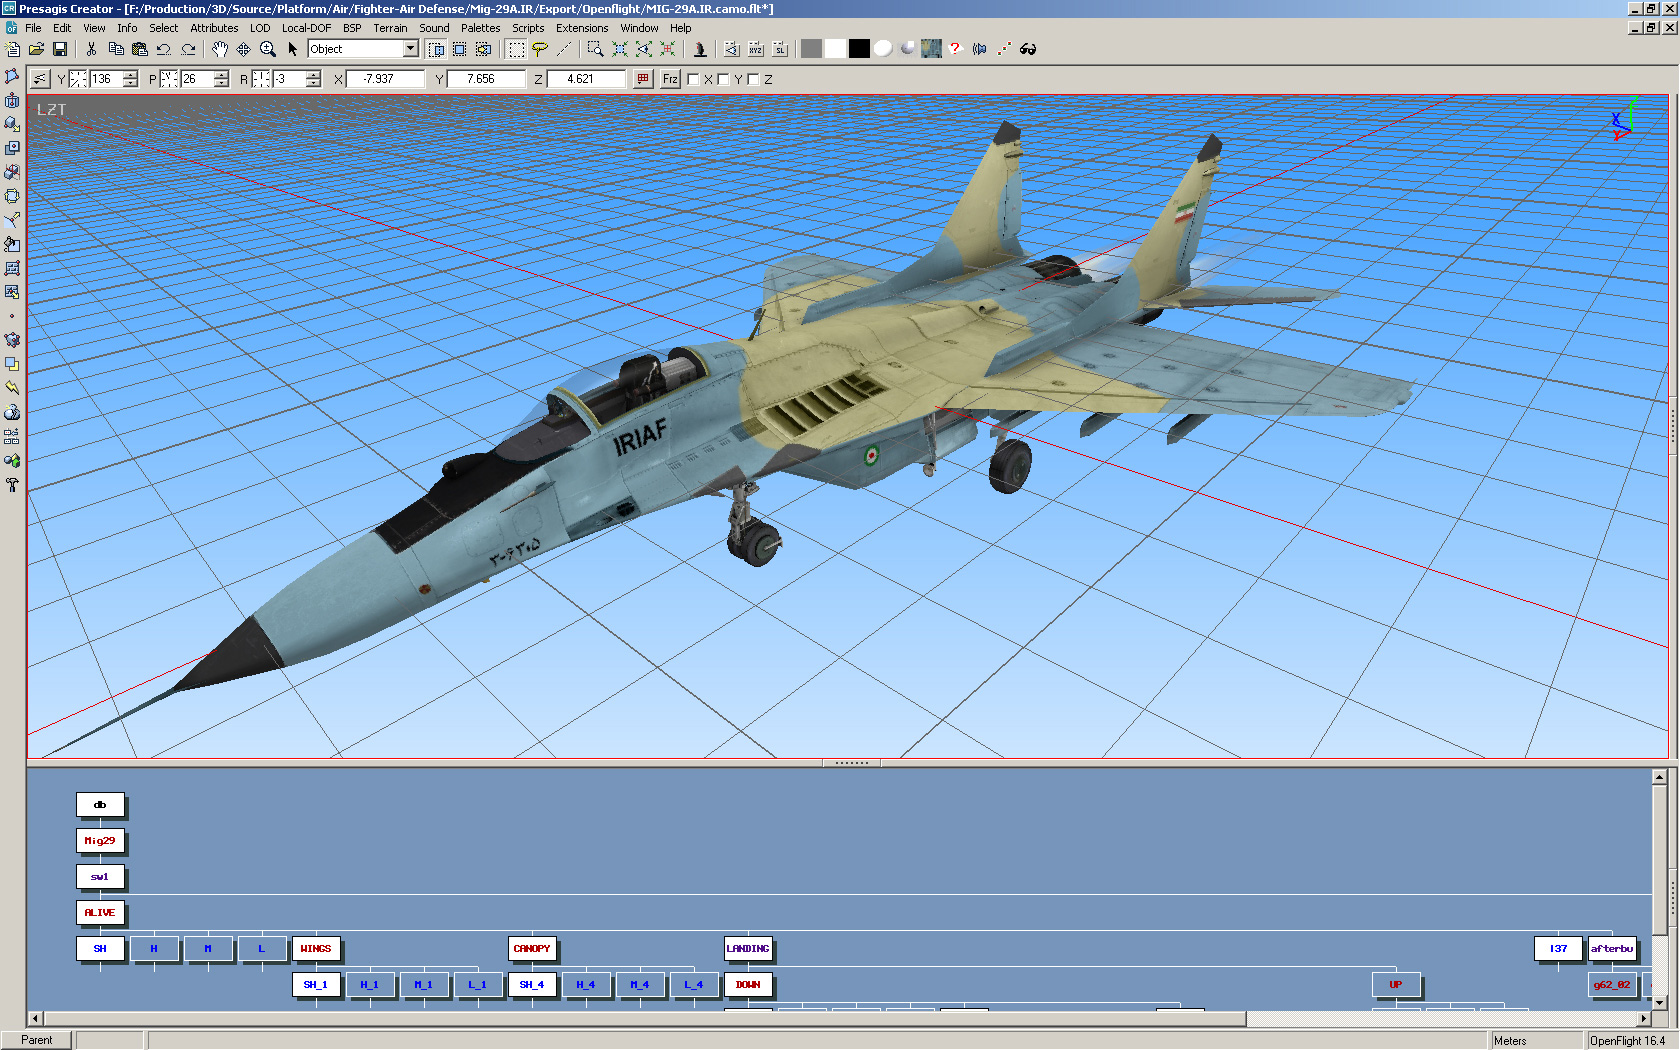 Model in Presagis Creator, prior to exporting to OpenFlight format and use of the MetaVR conversion utility.